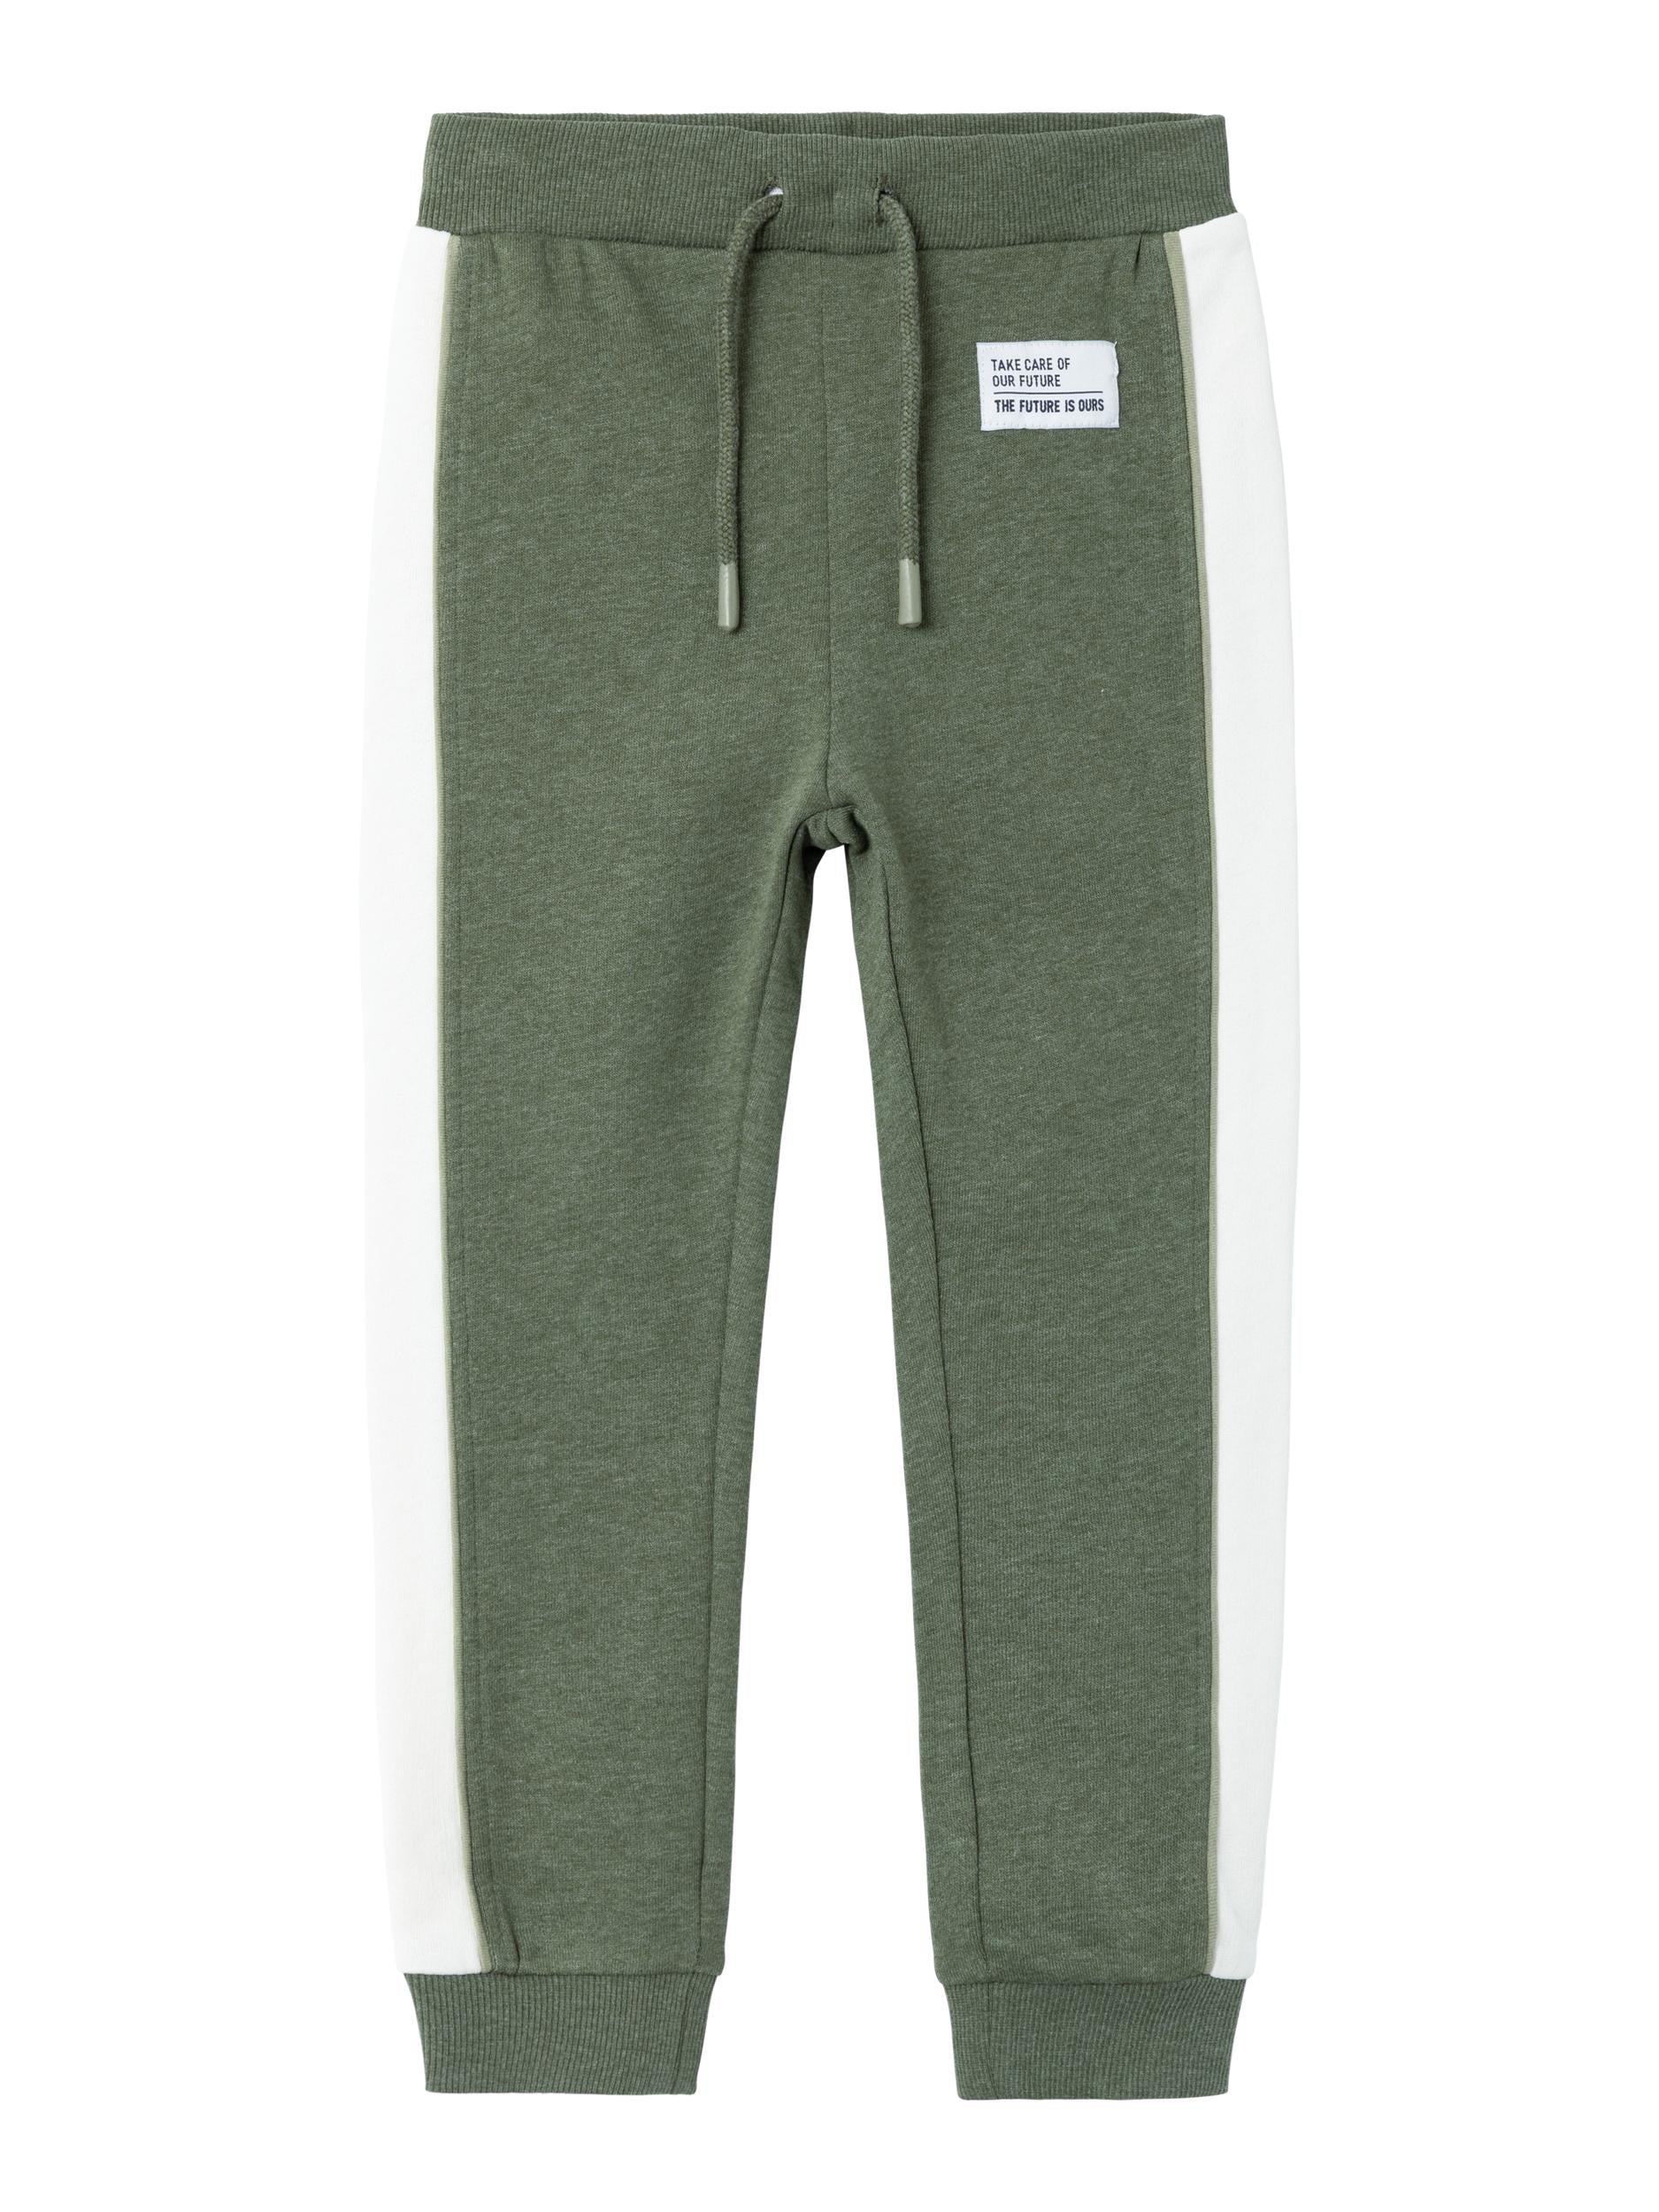 Boy's Nulle Sweat Pant-Rifle Green-Front View